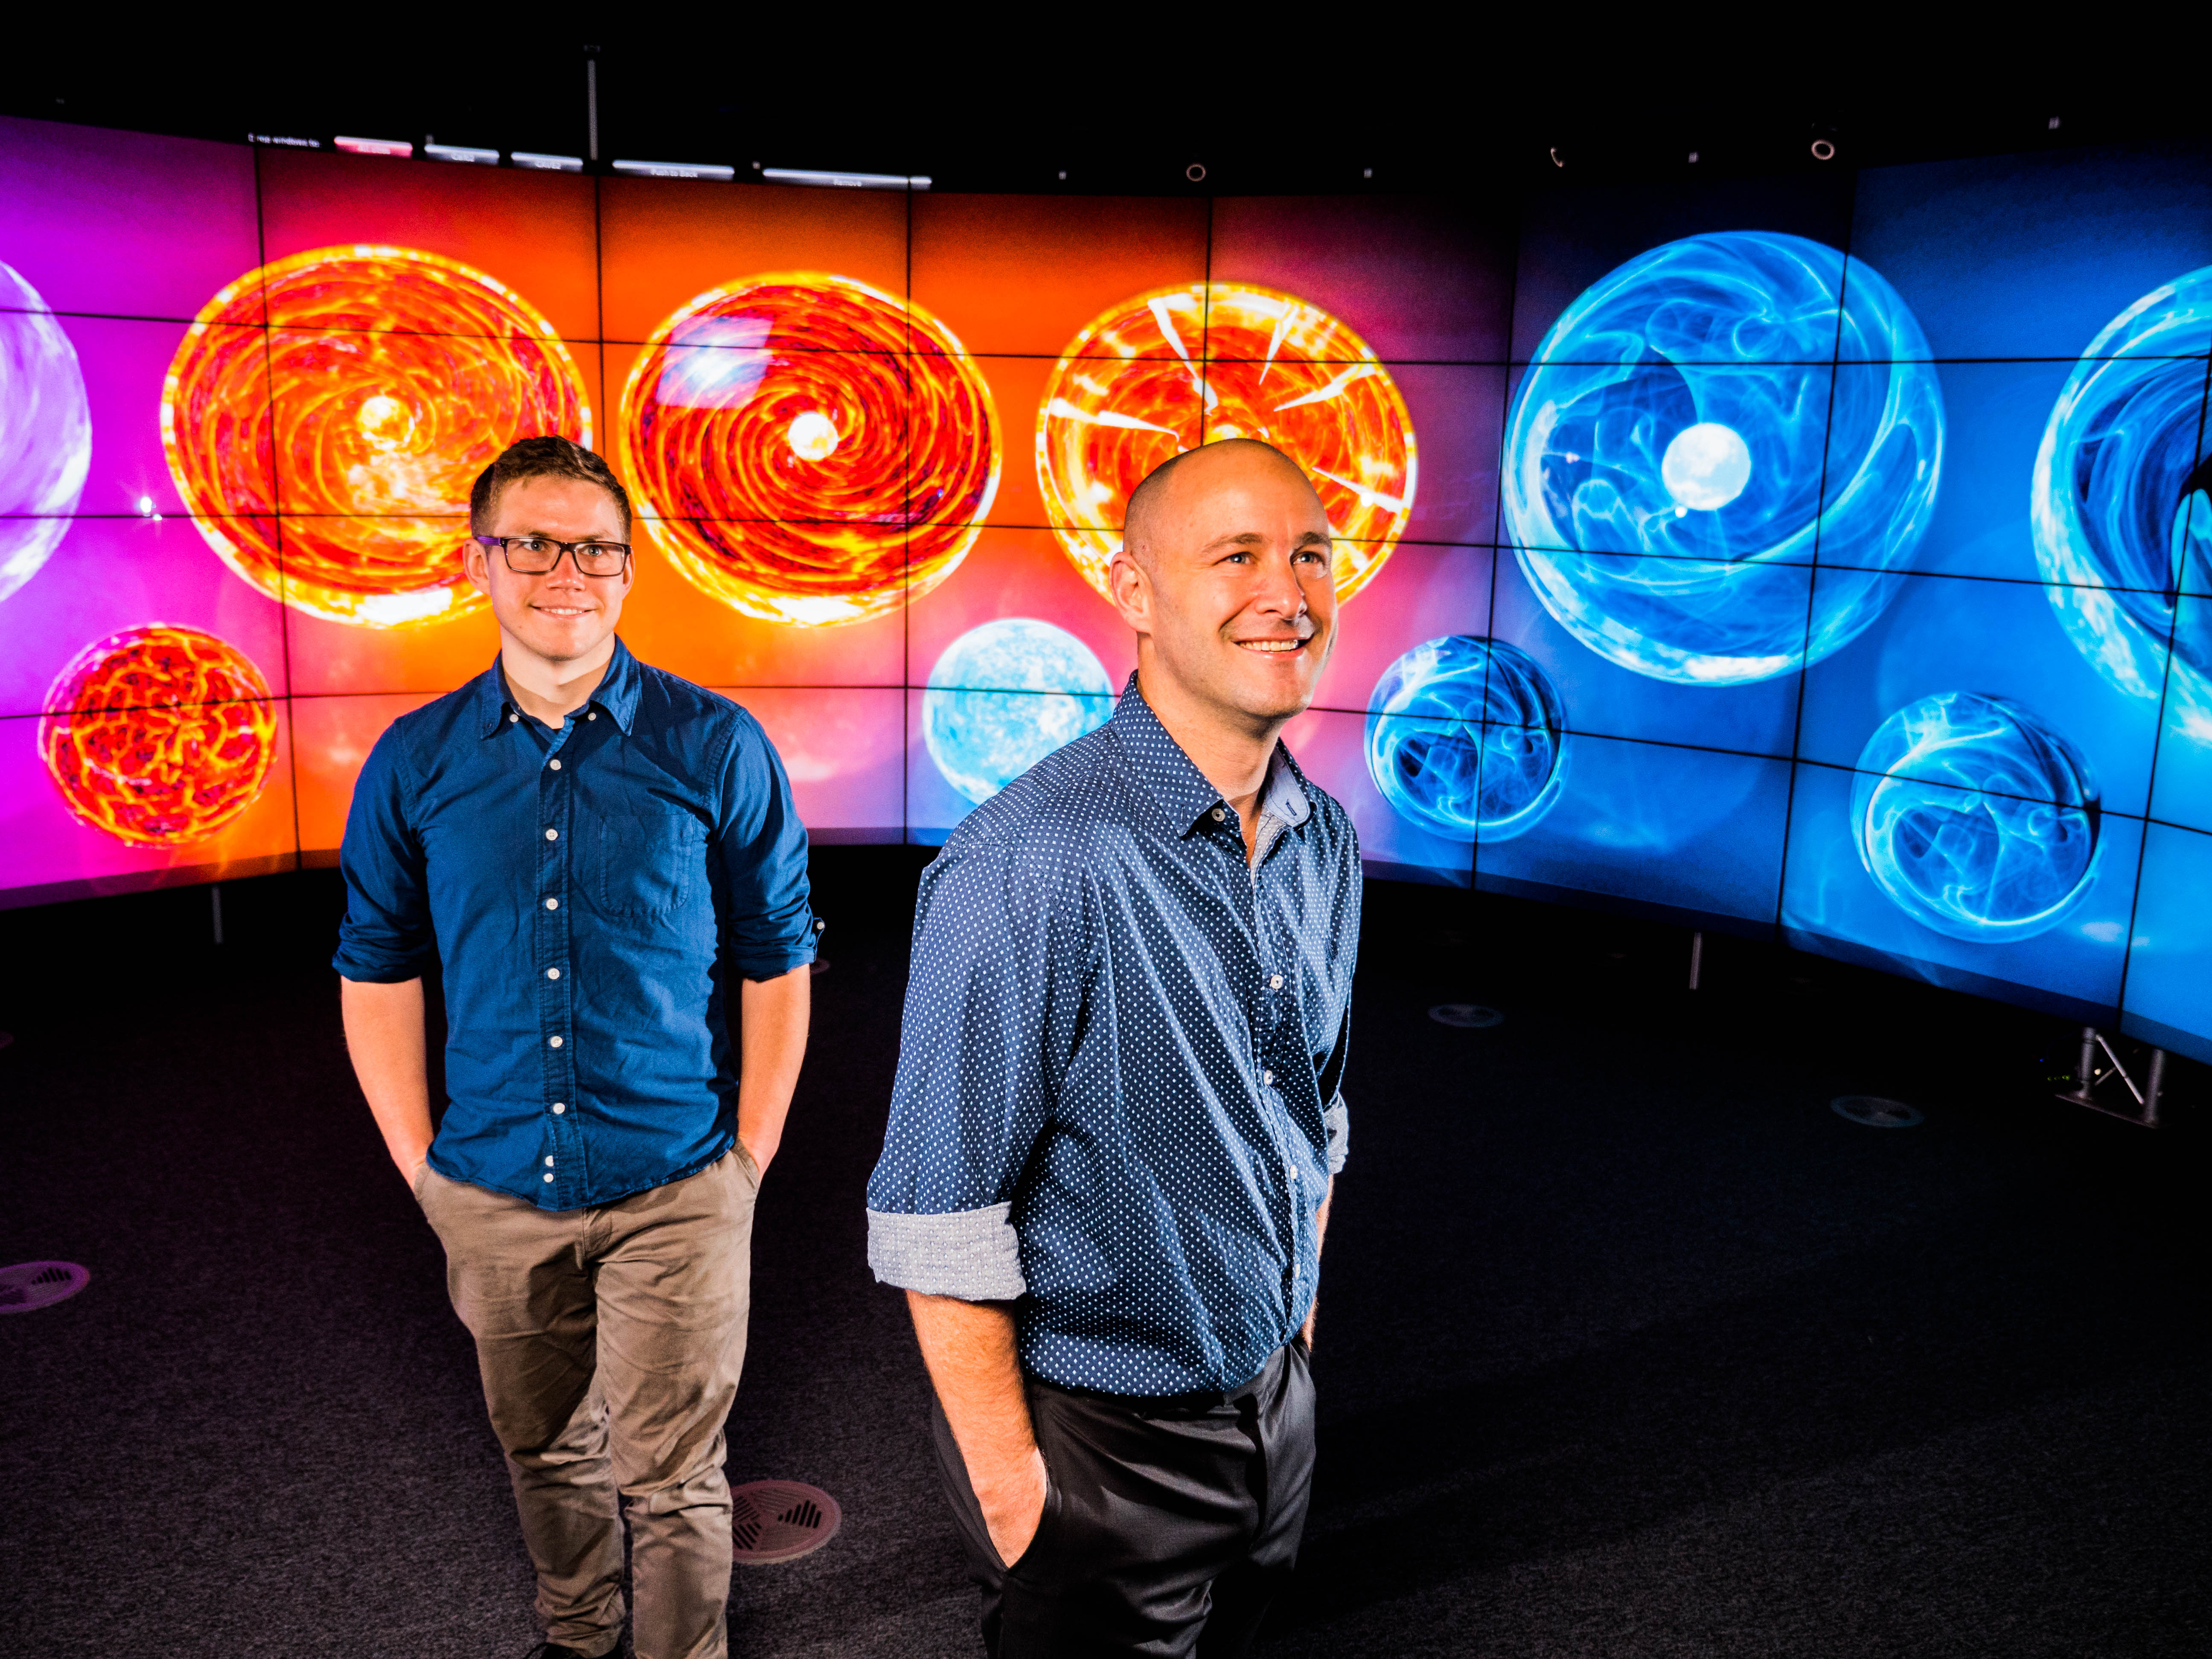 Greg Ashton and I standing in front of neutron stars!  Images by Carl Knox.